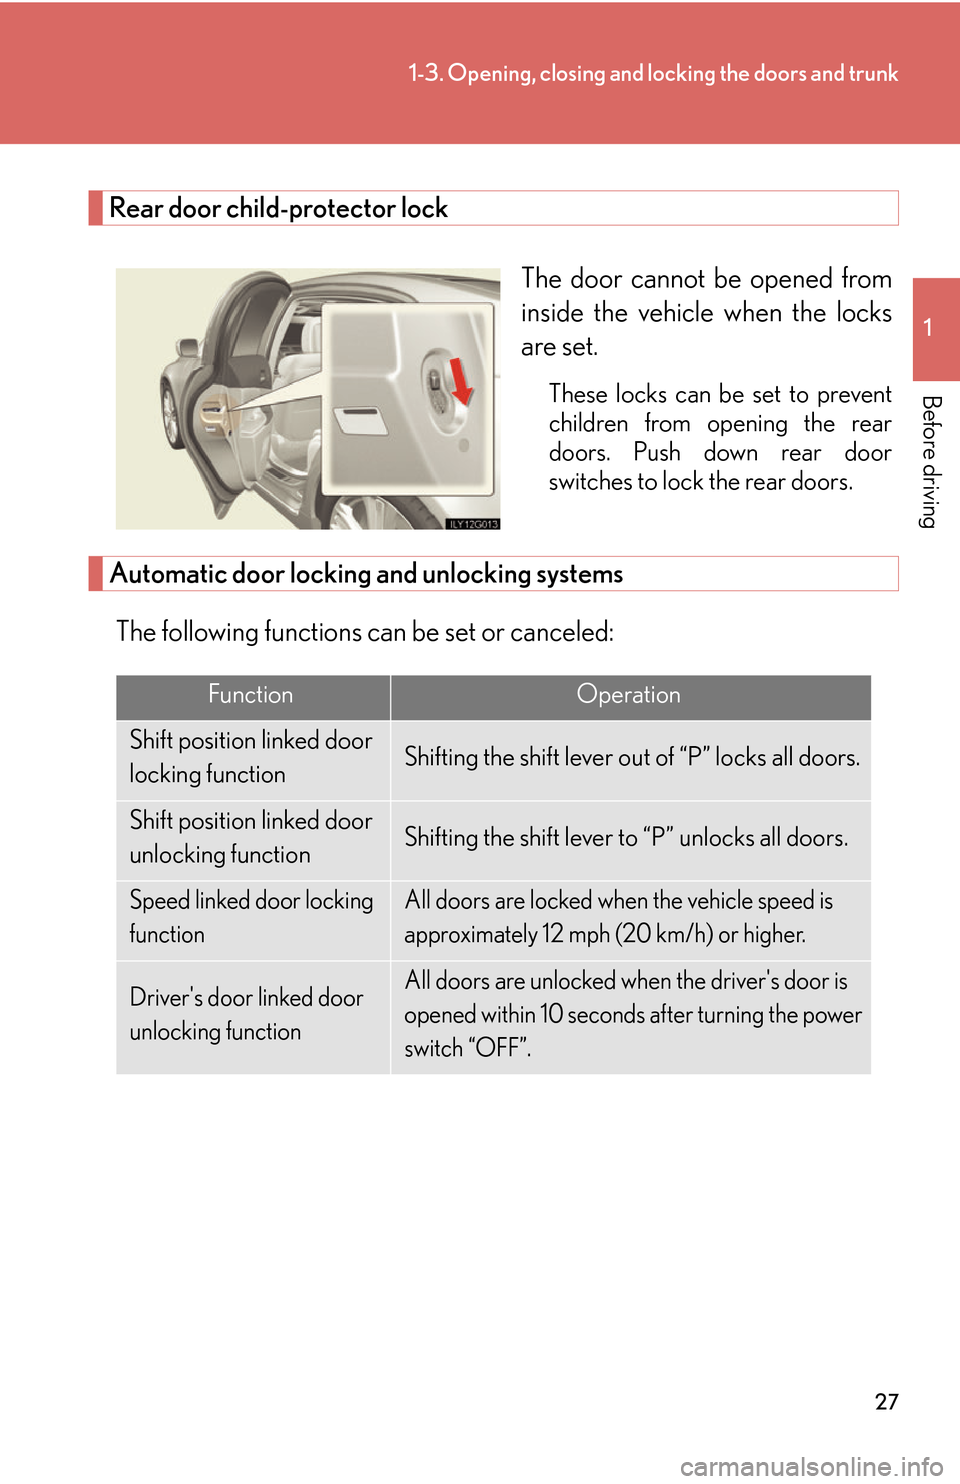 Lexus GS450h 2007  Do-it-yourself maintenance / LEXUS 2007 GS450H THROUGH JUNE 2006 PROD.  (OM30727U) Service Manual 27
1-3. Opening, closing and locking the doors and trunk
1
Before driving
Rear door child-protector lock
The door cannot be opened from 
inside the vehicle when the locks 
are set.
These locks can be 